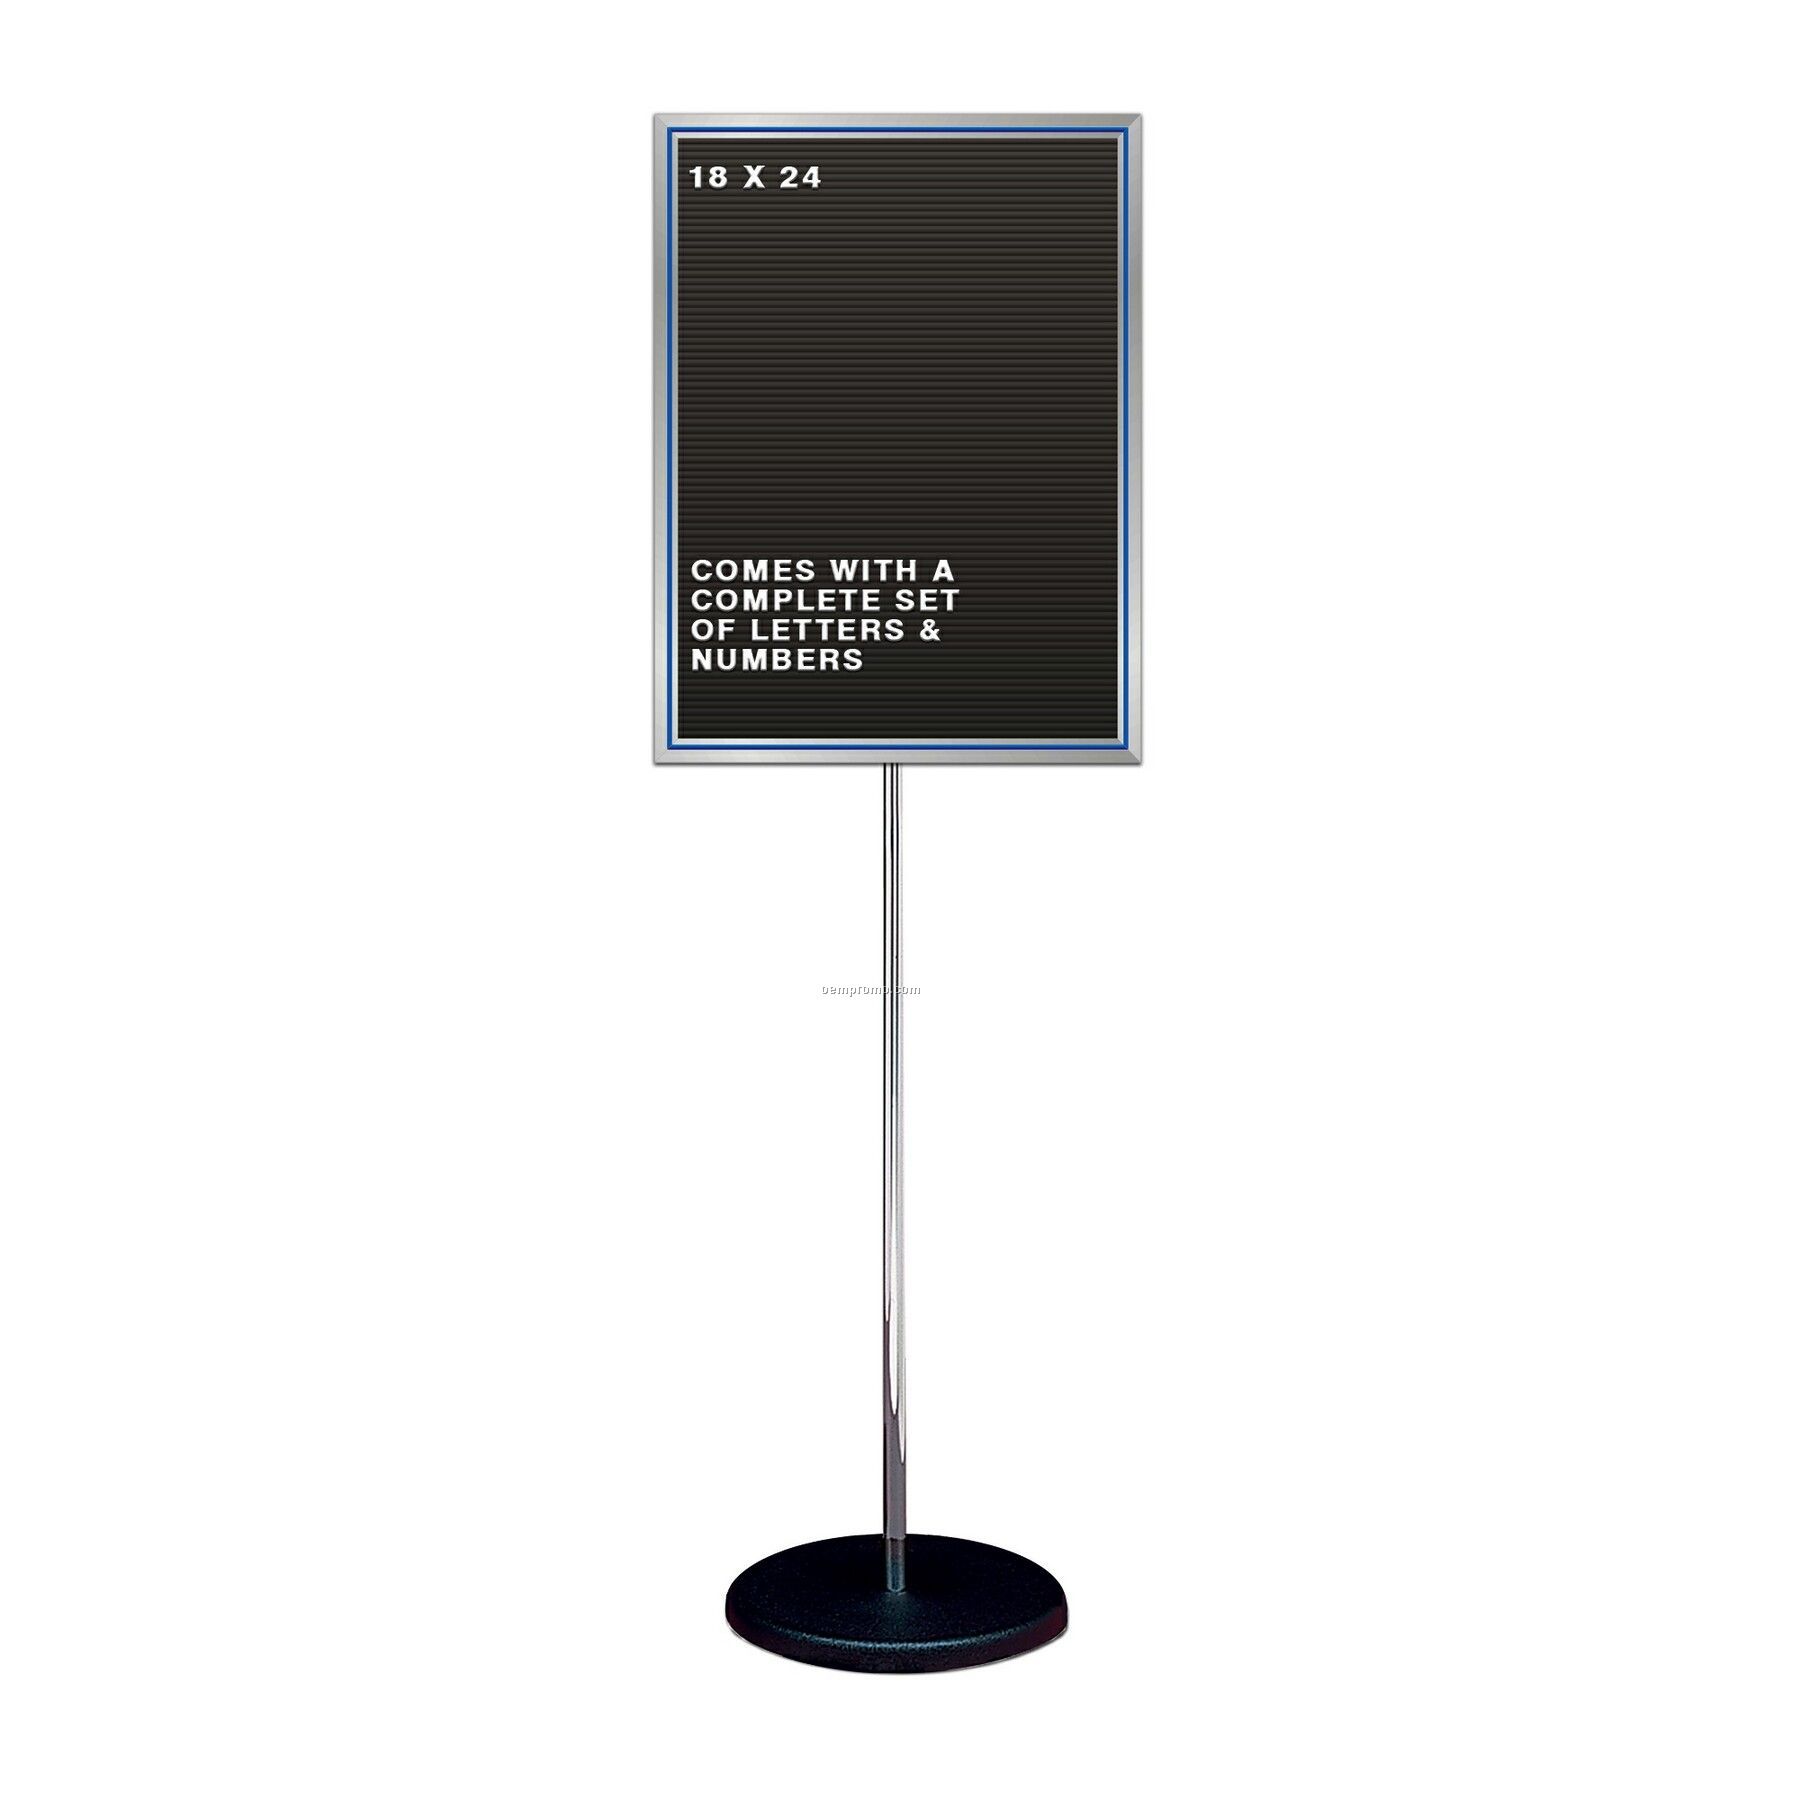 Free Standing Changeable Letter Board W/ Chrome Pole Stand (19